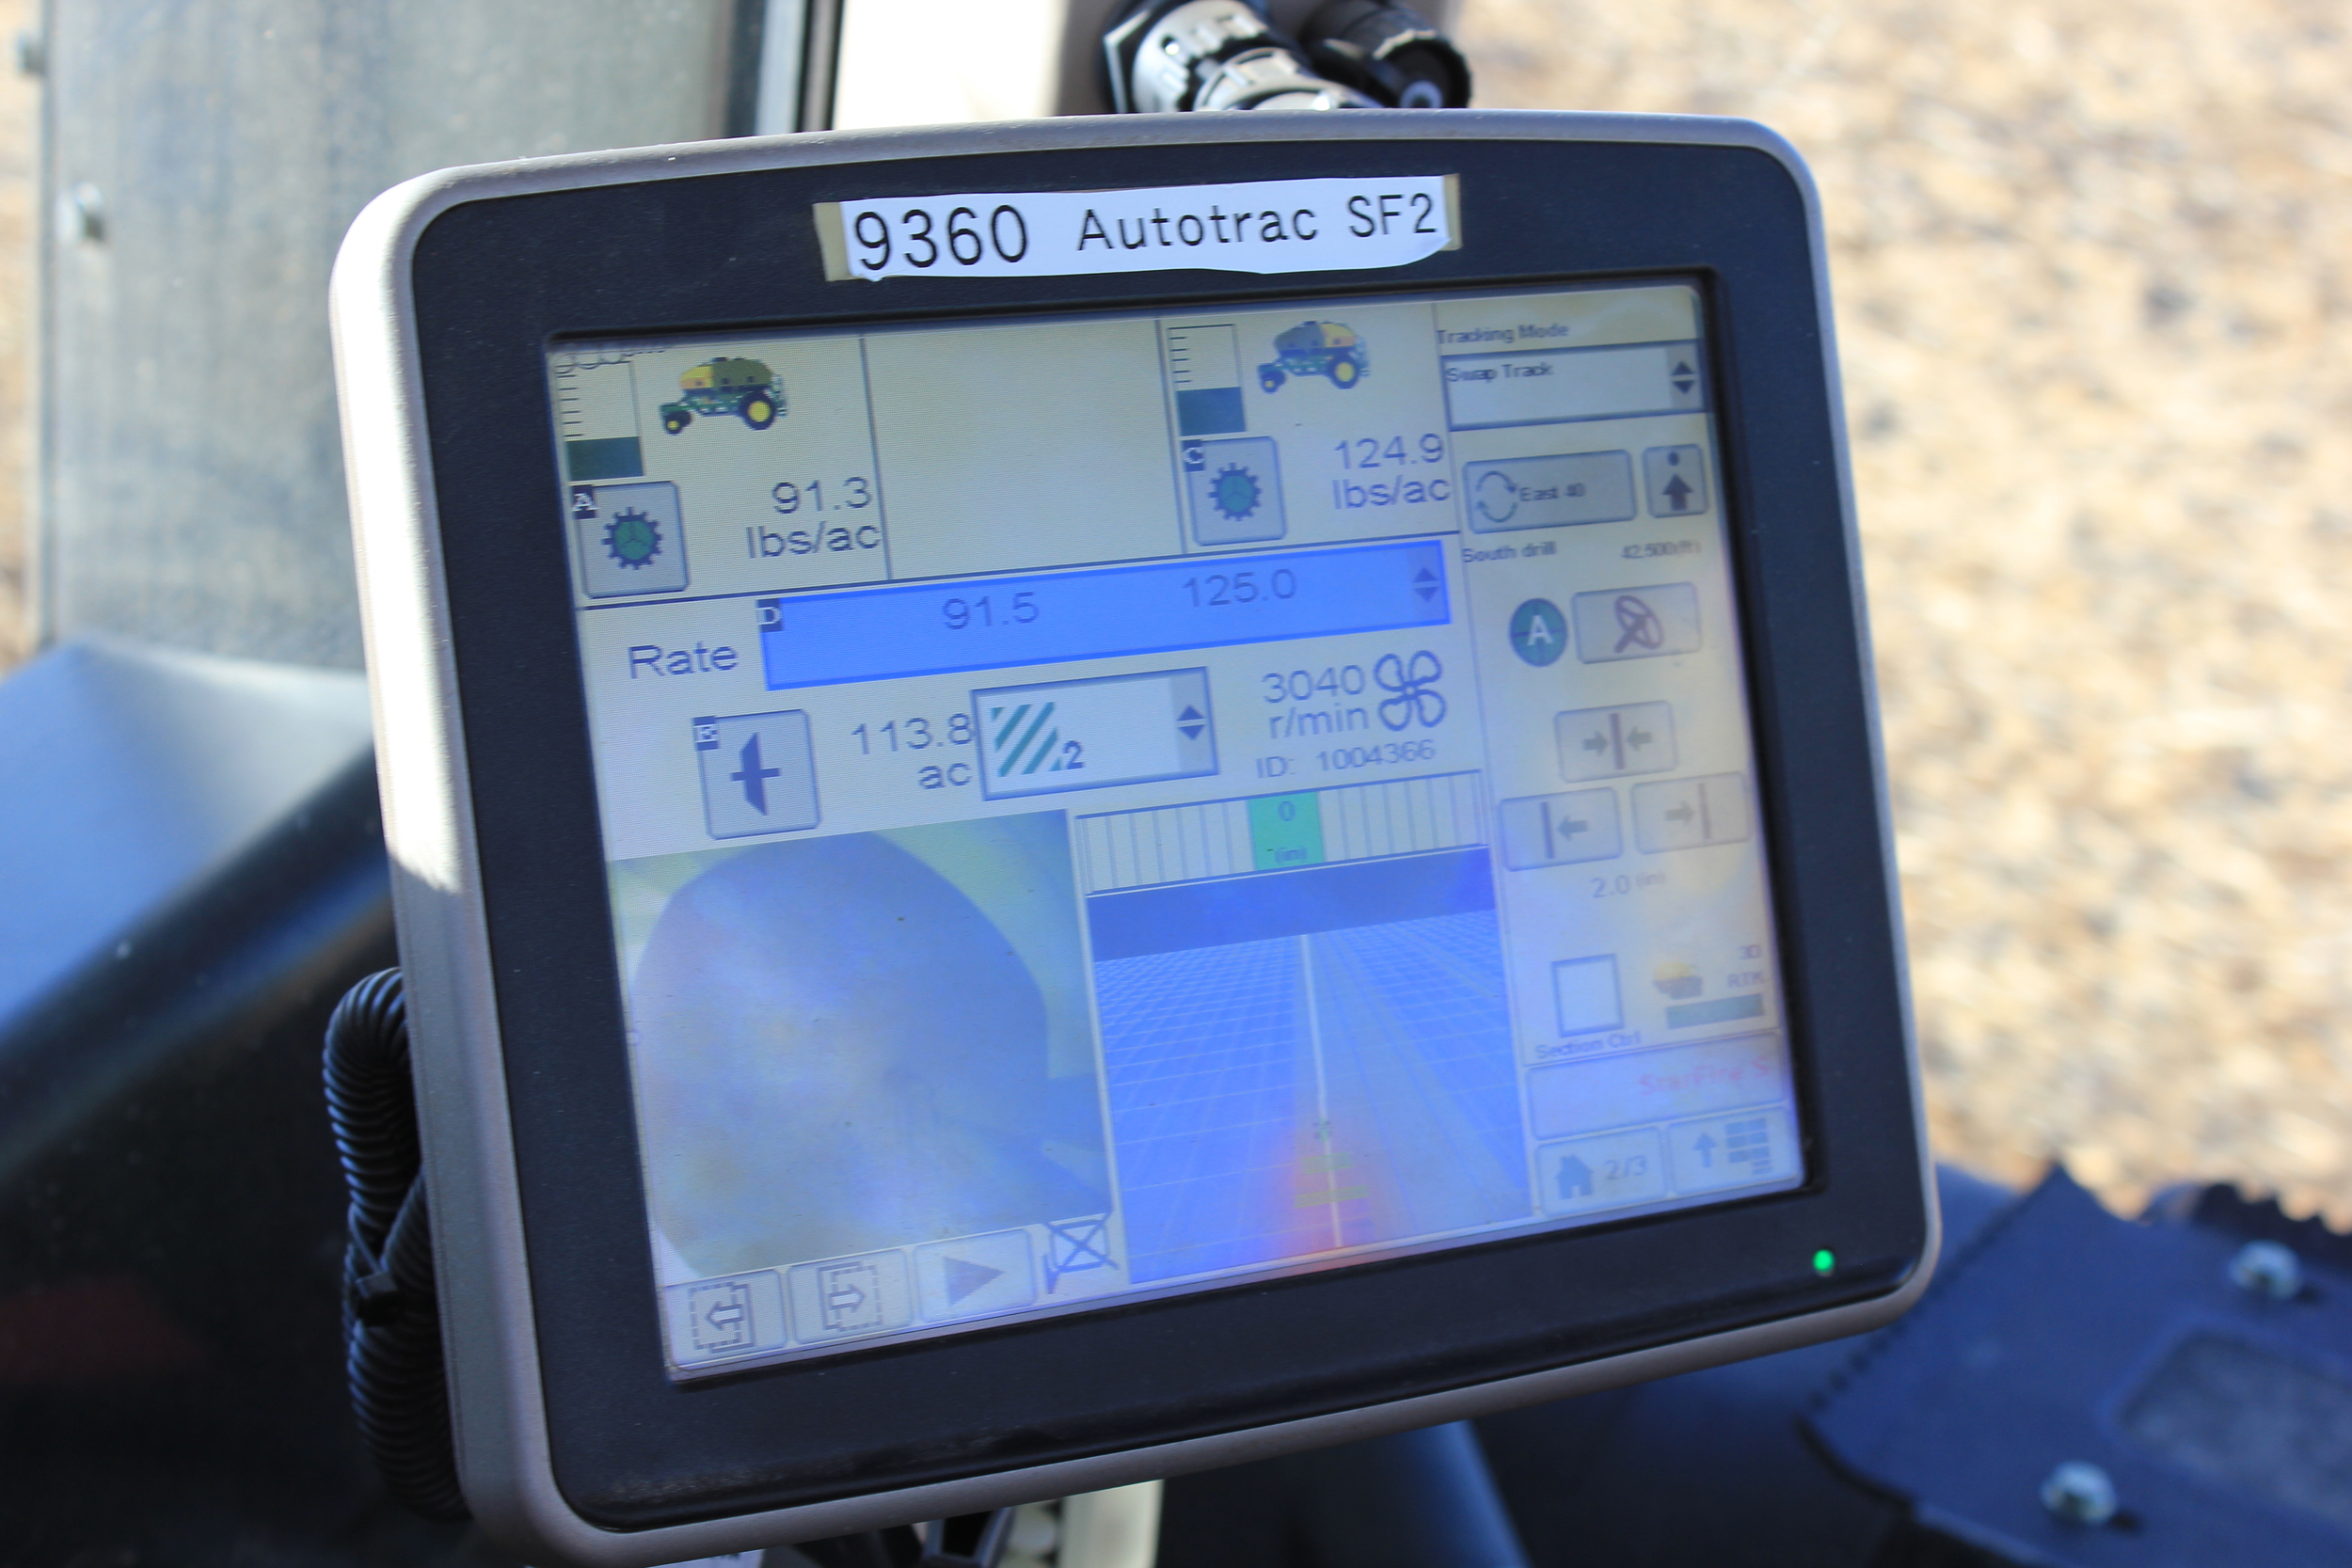 The screen of the GPS unit that shows how seeds are planted and nitrogen is applied at variable rates based on the previous year's yield data